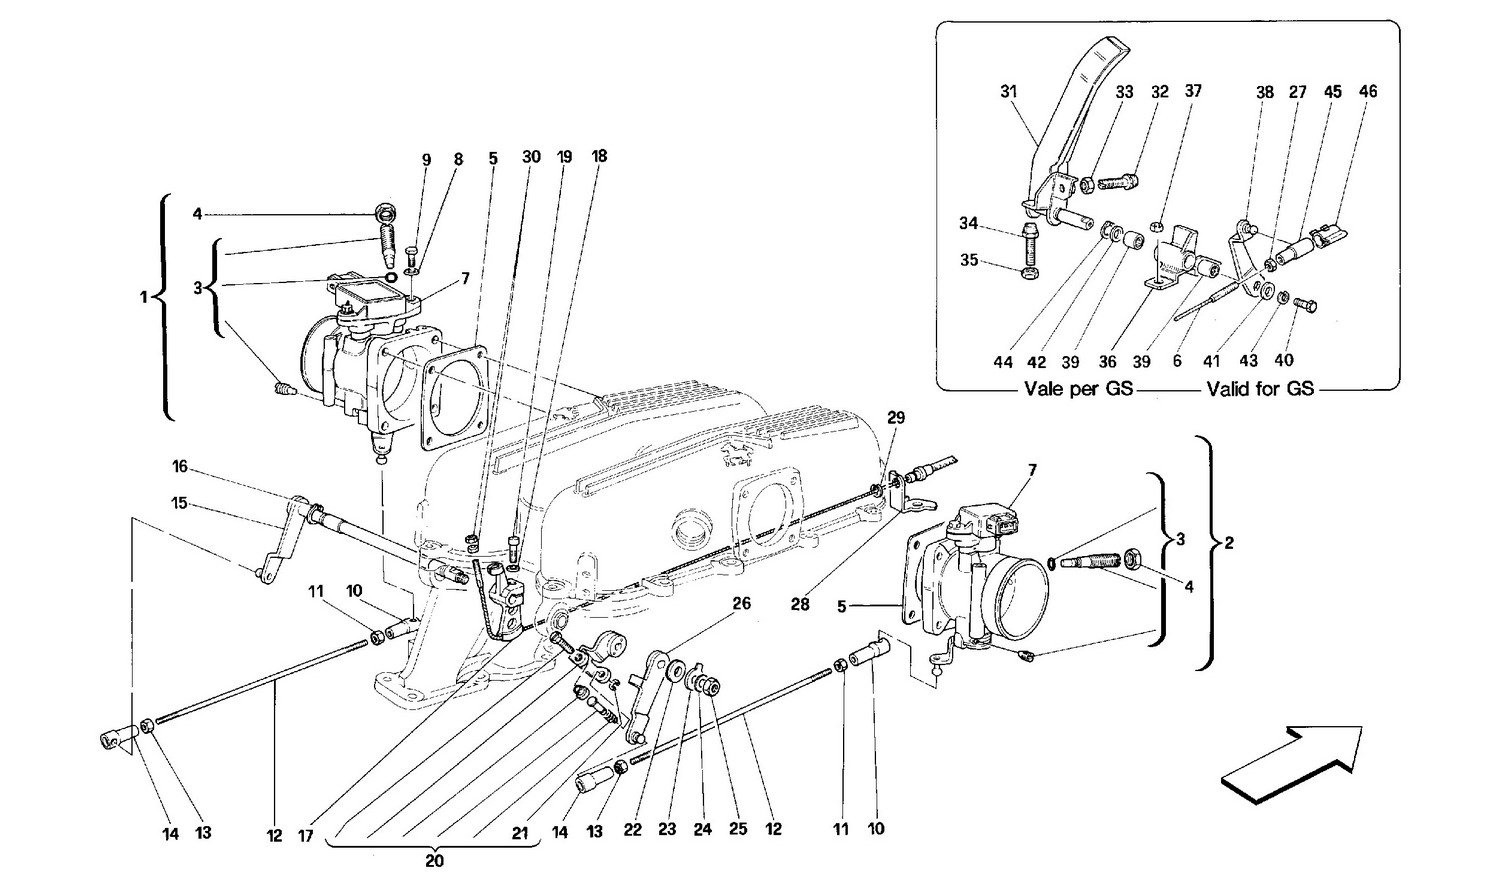 Schematic: Throttle Housing And Linkage